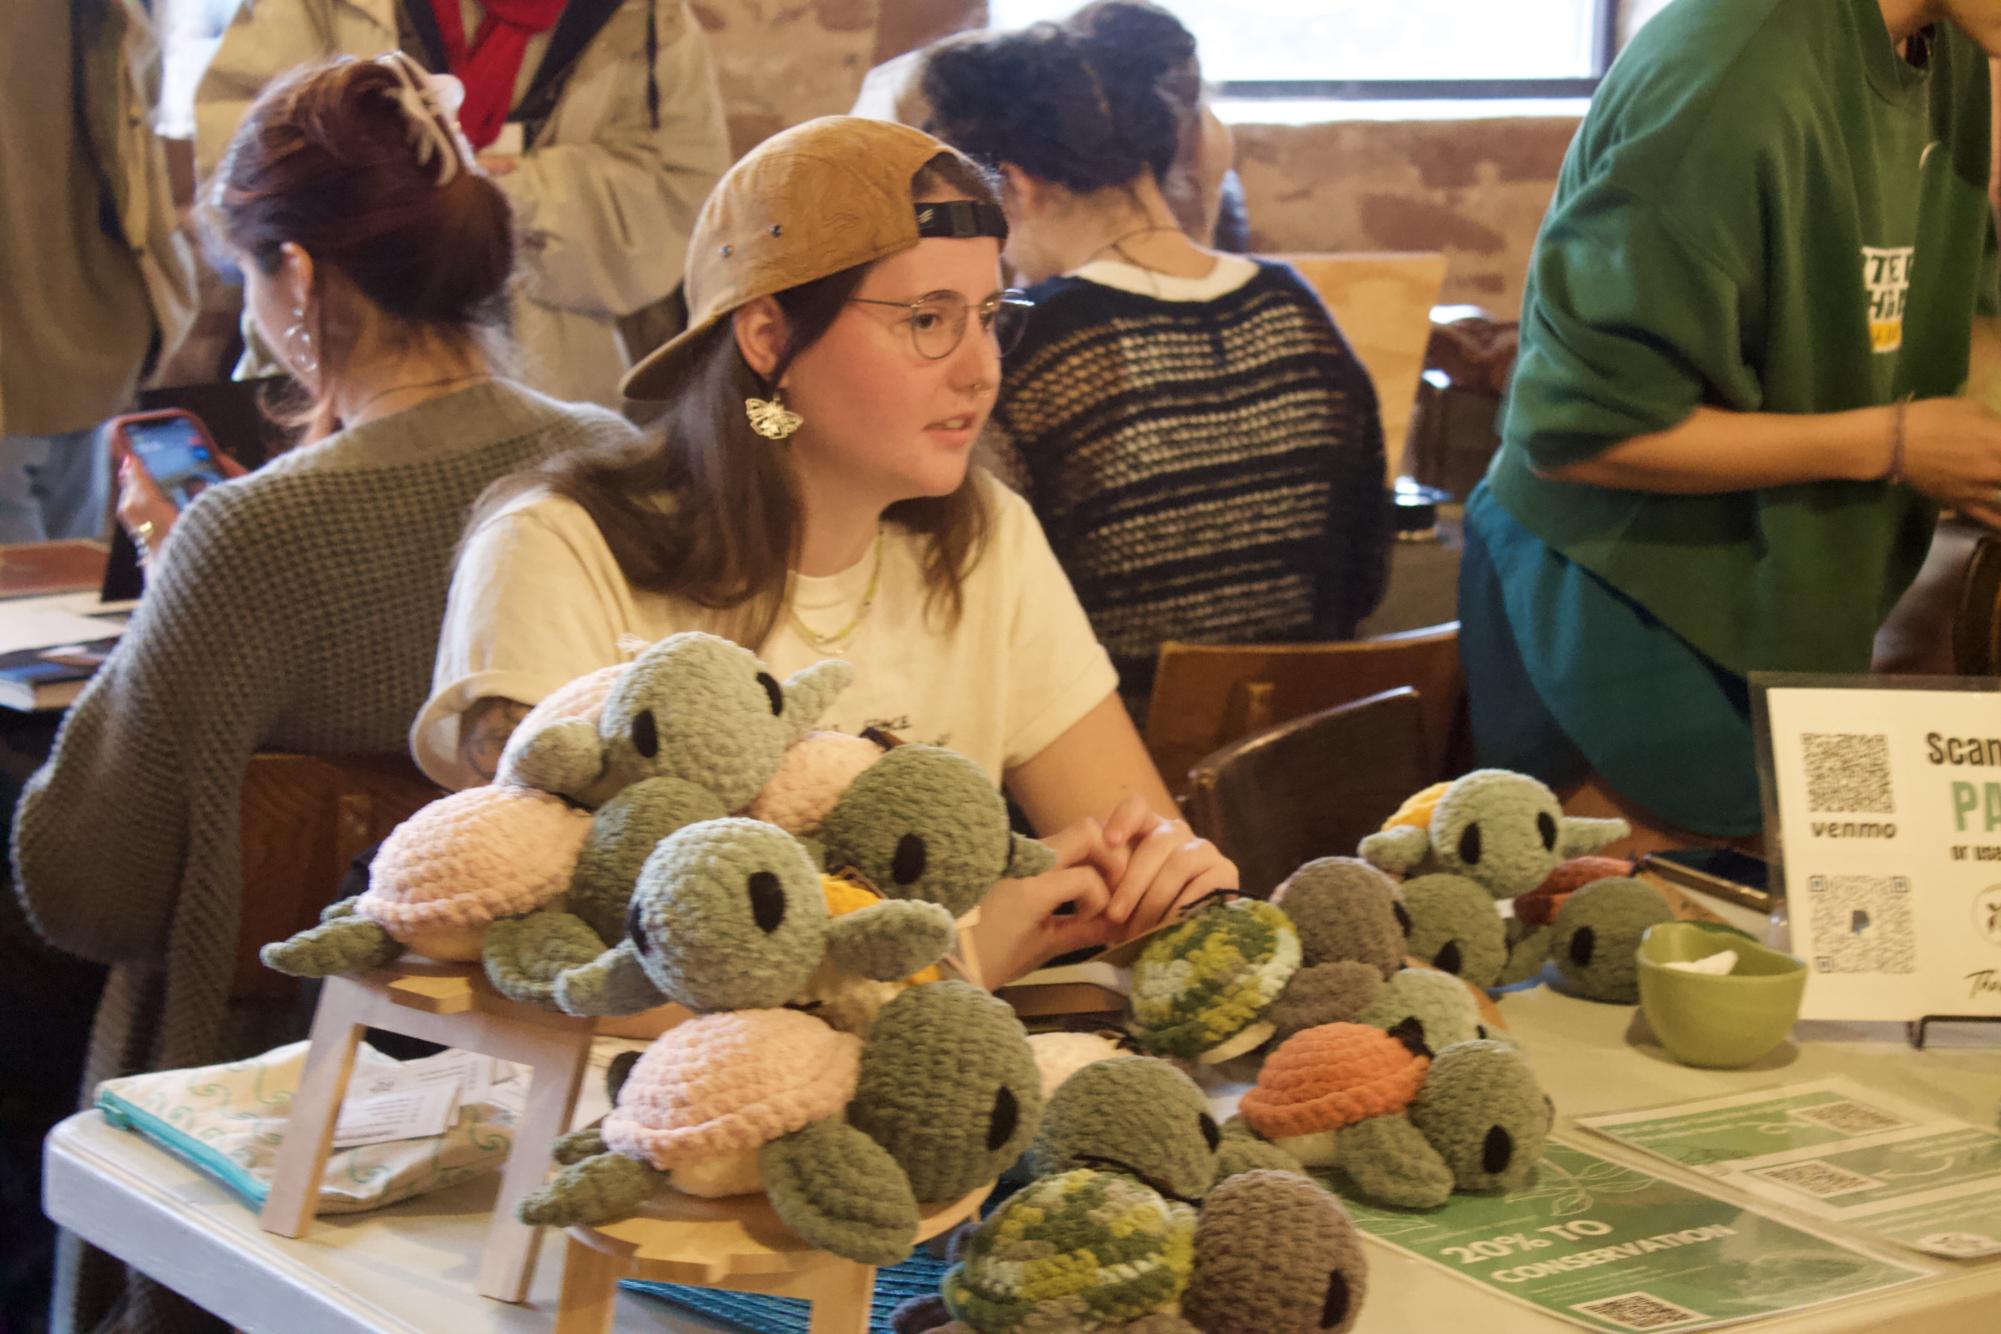 PILES OF ART — Senior Nicole Cash showcases her environmentally friendly crochet turtles in piles on her desk, hoping to sell many at the pop-up shop.